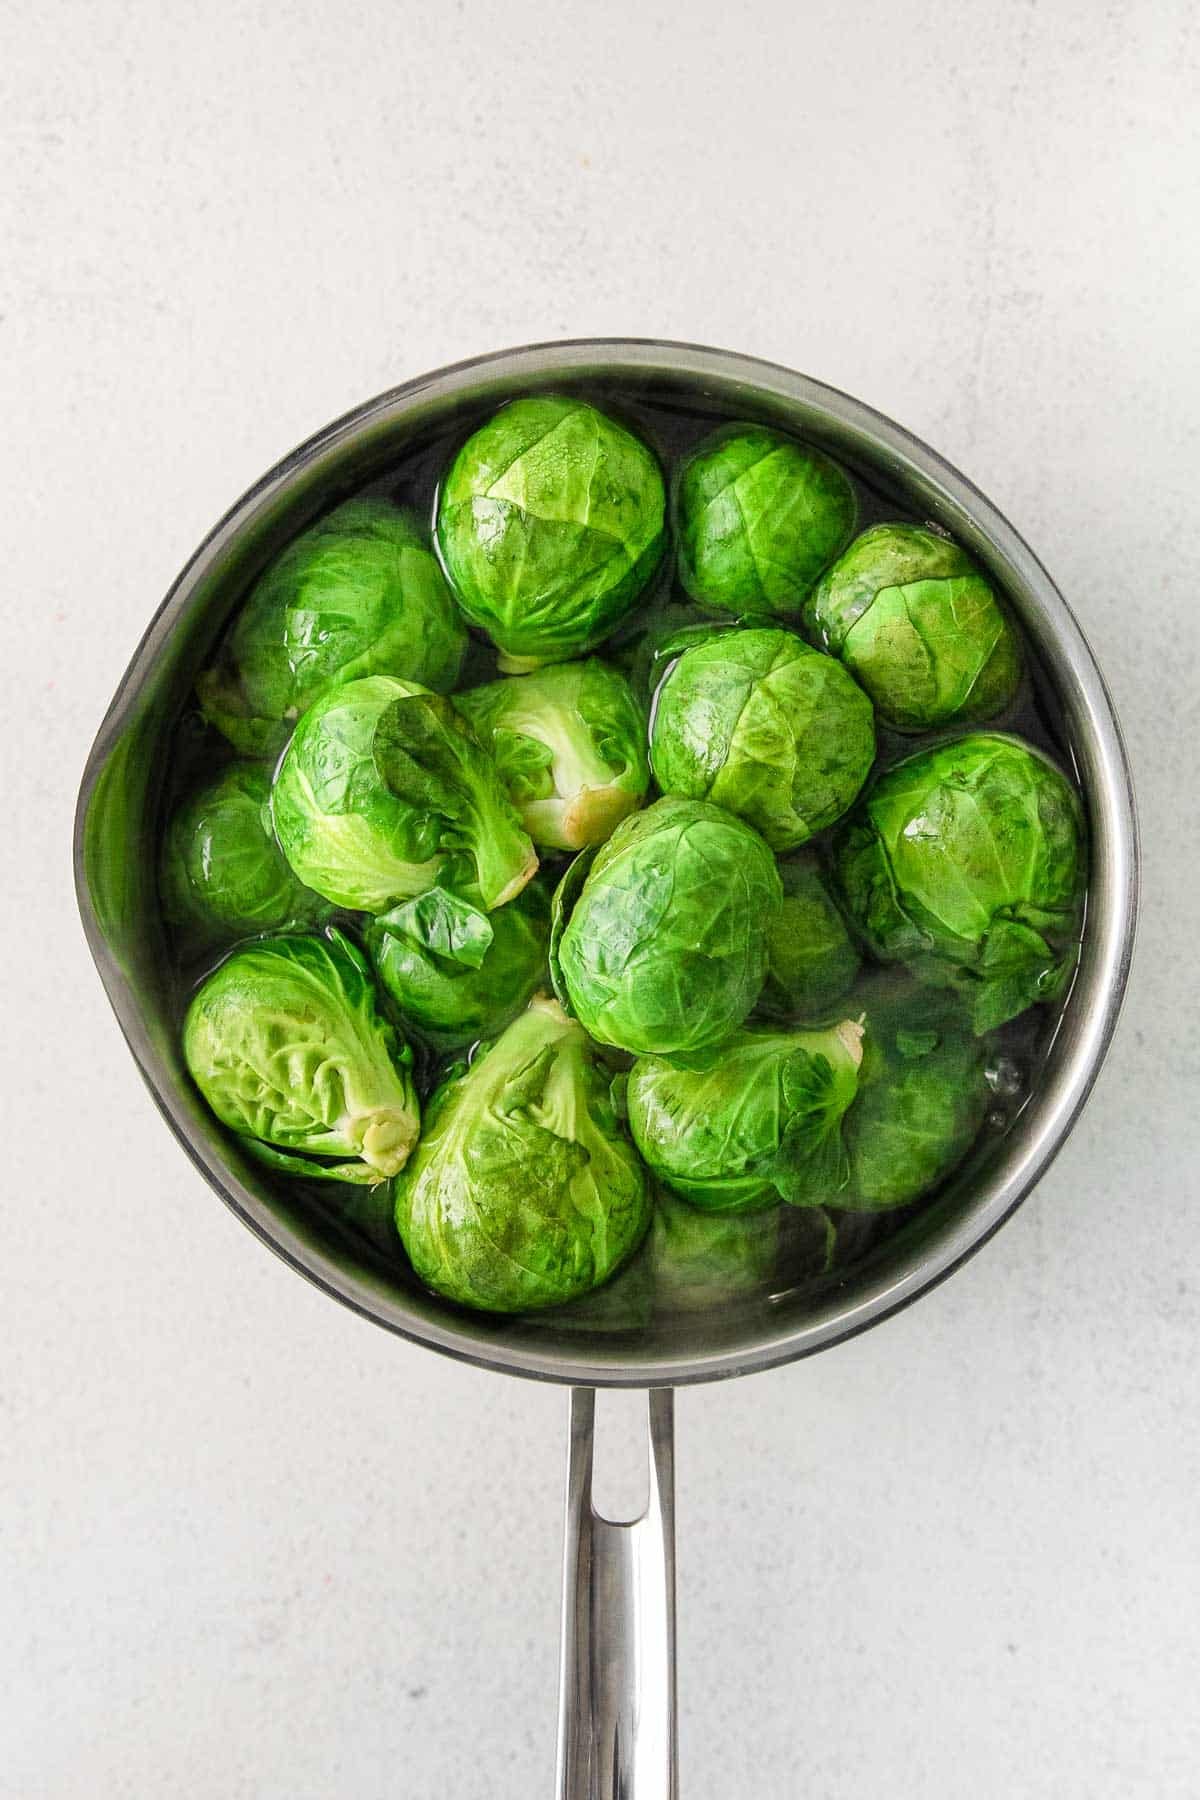 Cooking pot with brussel sprouts.